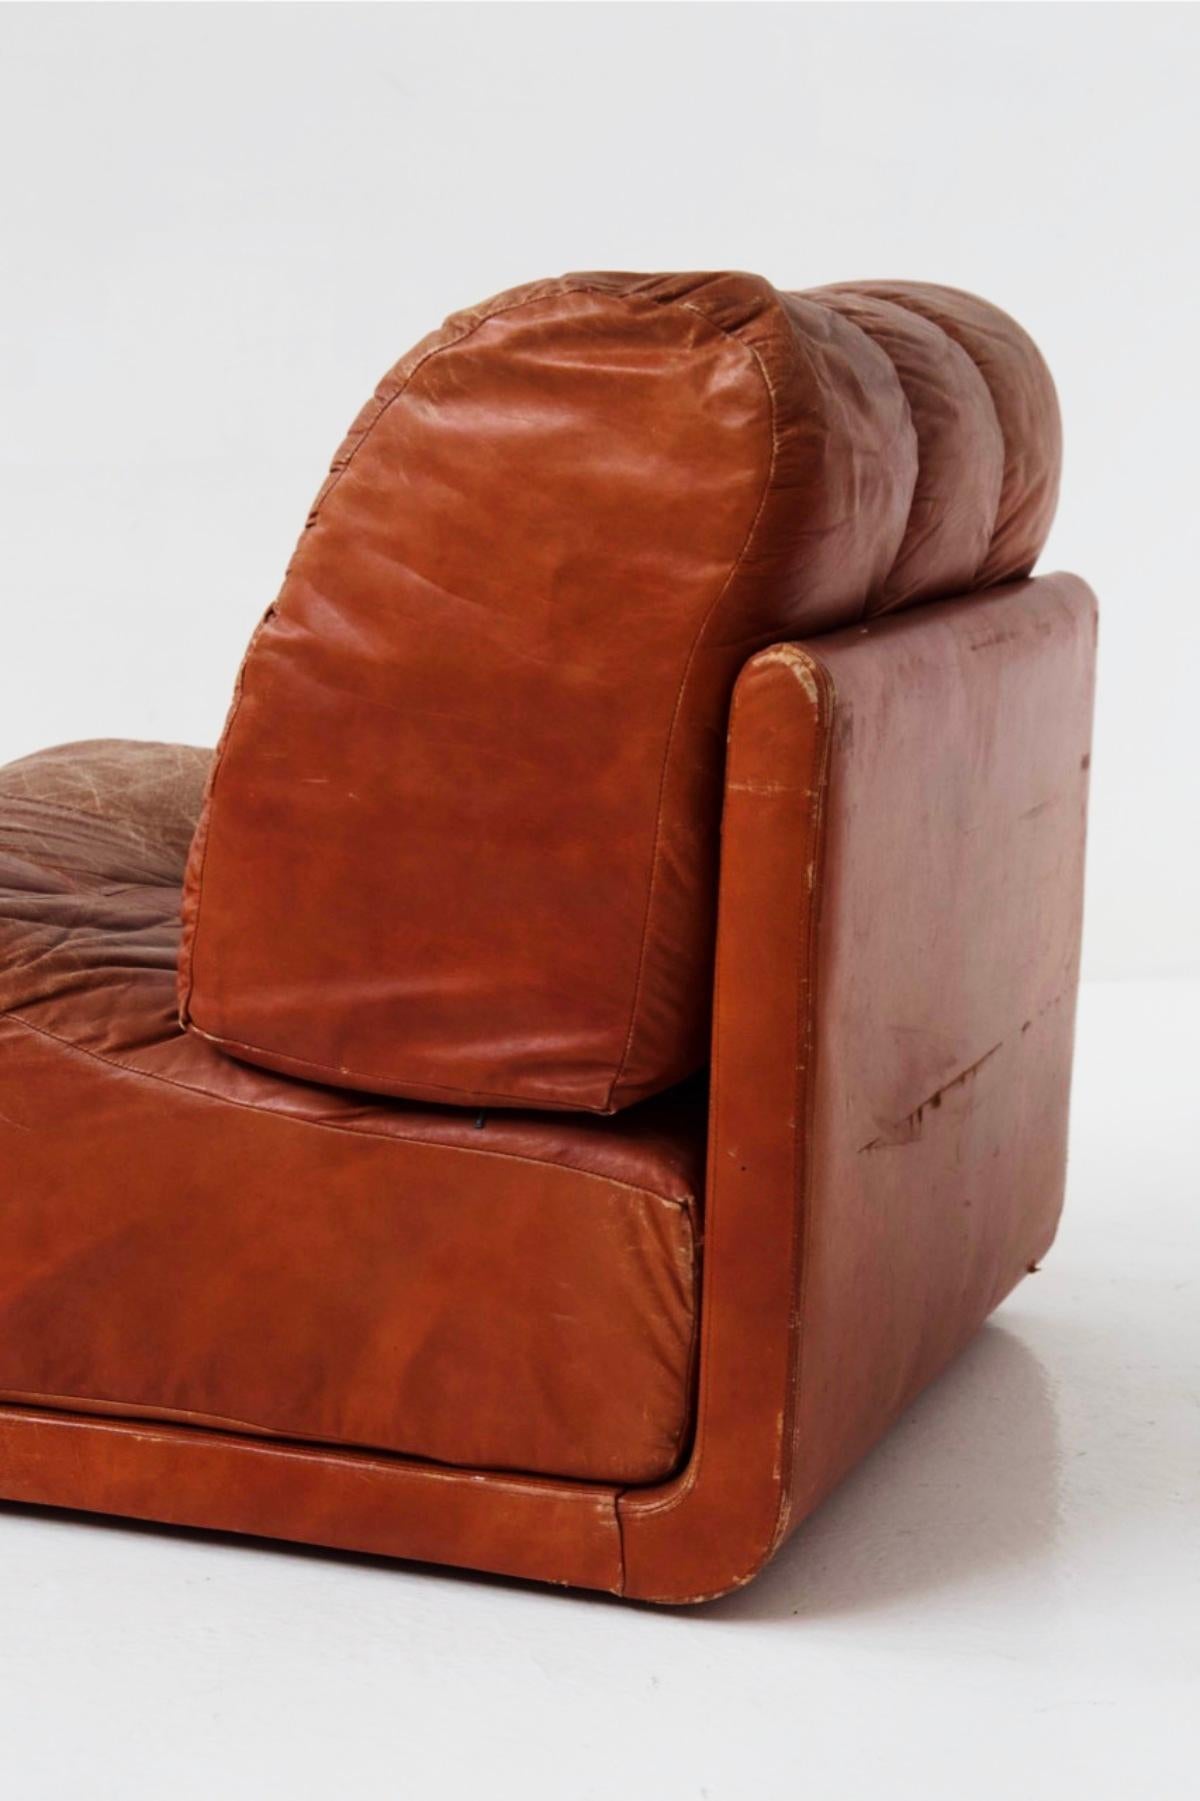 Leather Guido Faleschini Pace Collection Armchairs for Mariani